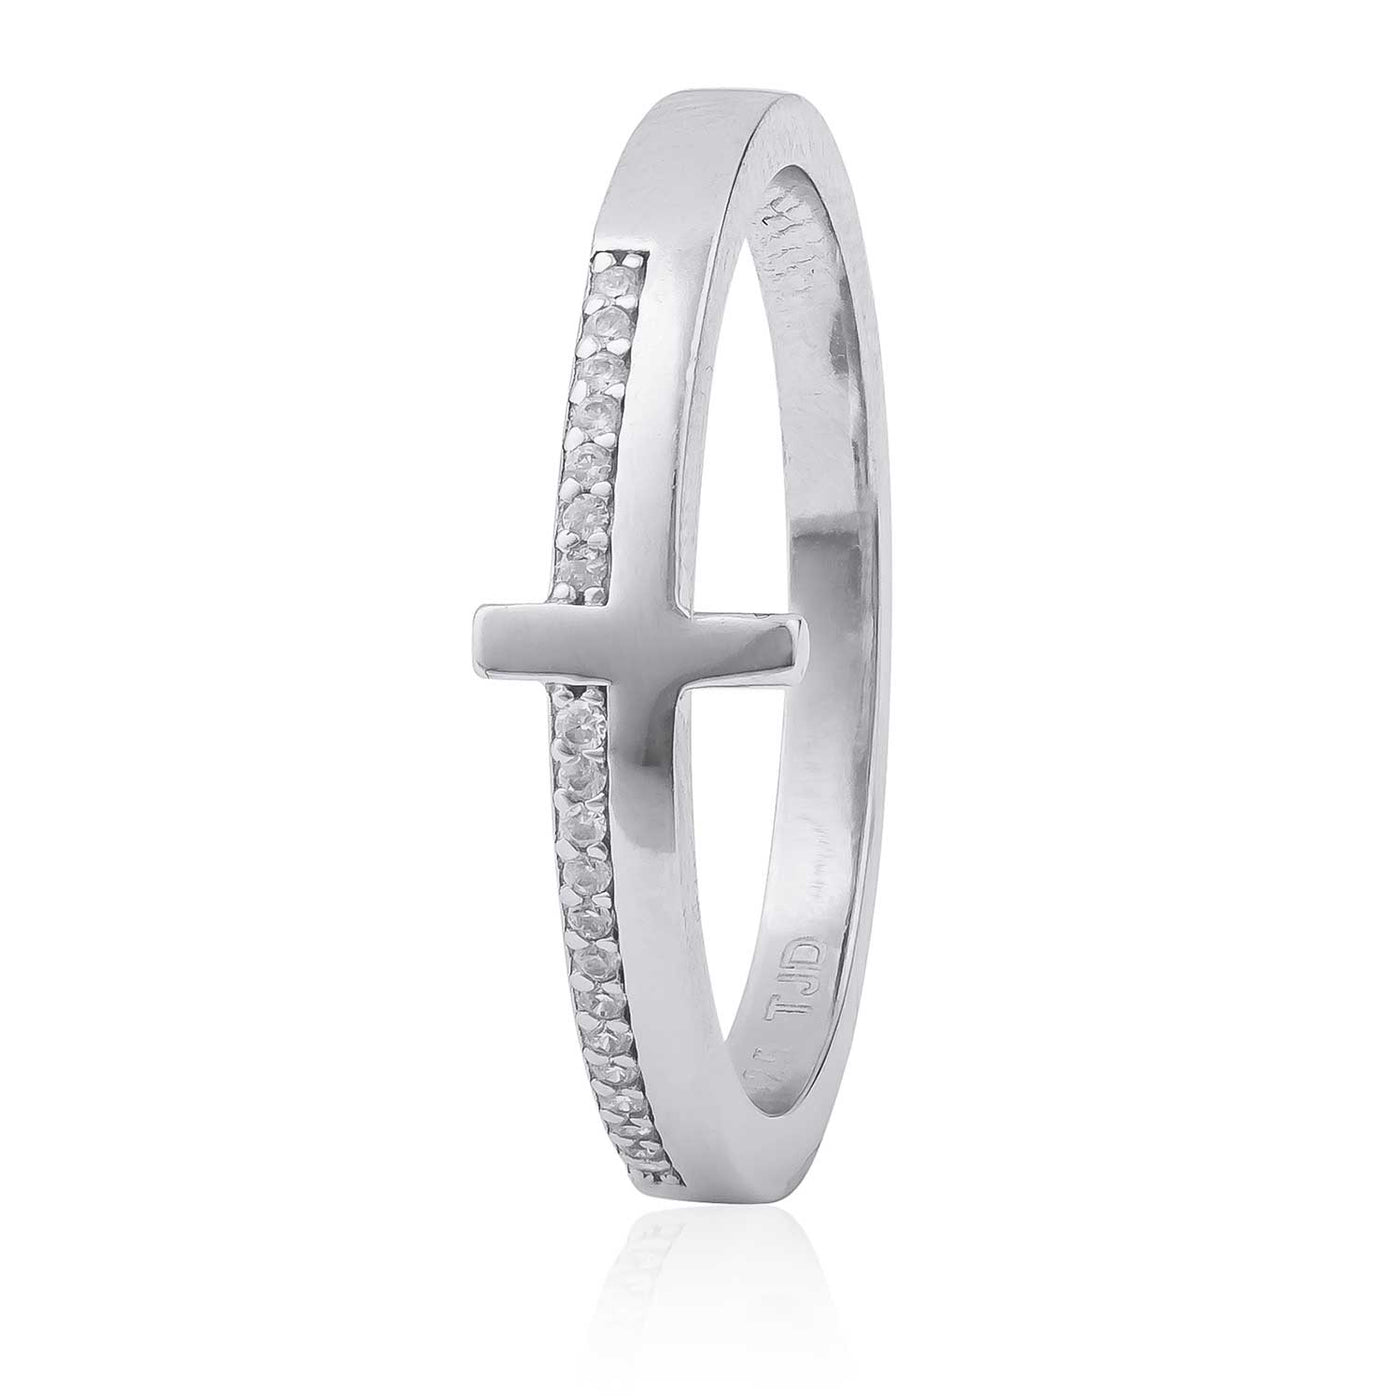 Rhodium Plated Sterling Silver Cross CZ Ring - 7